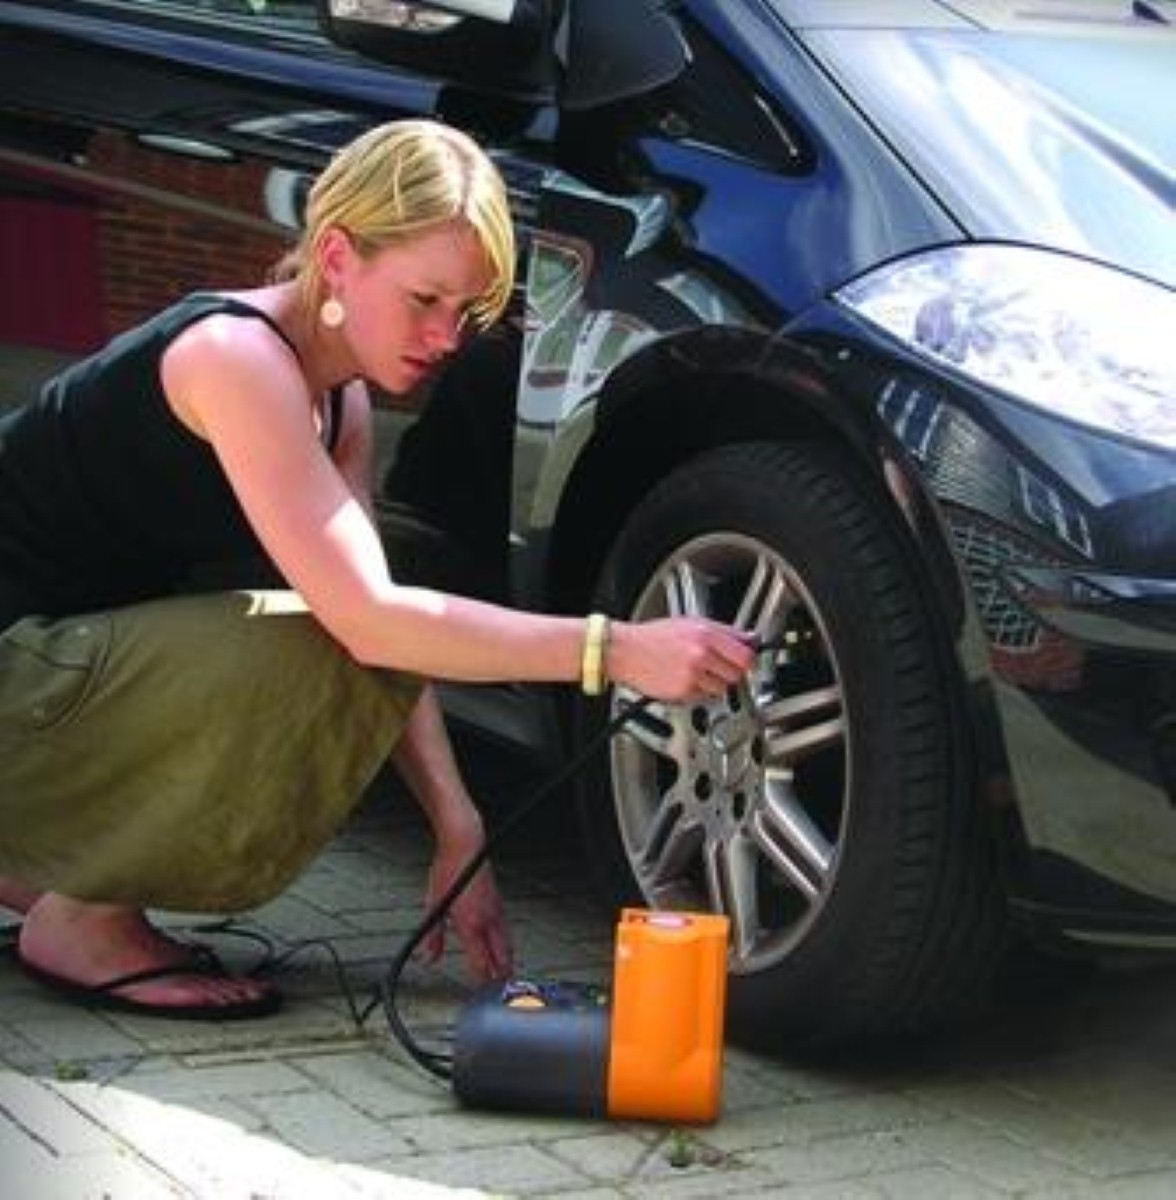 Flat tyres cause breakdowns and increase the risk of accidents